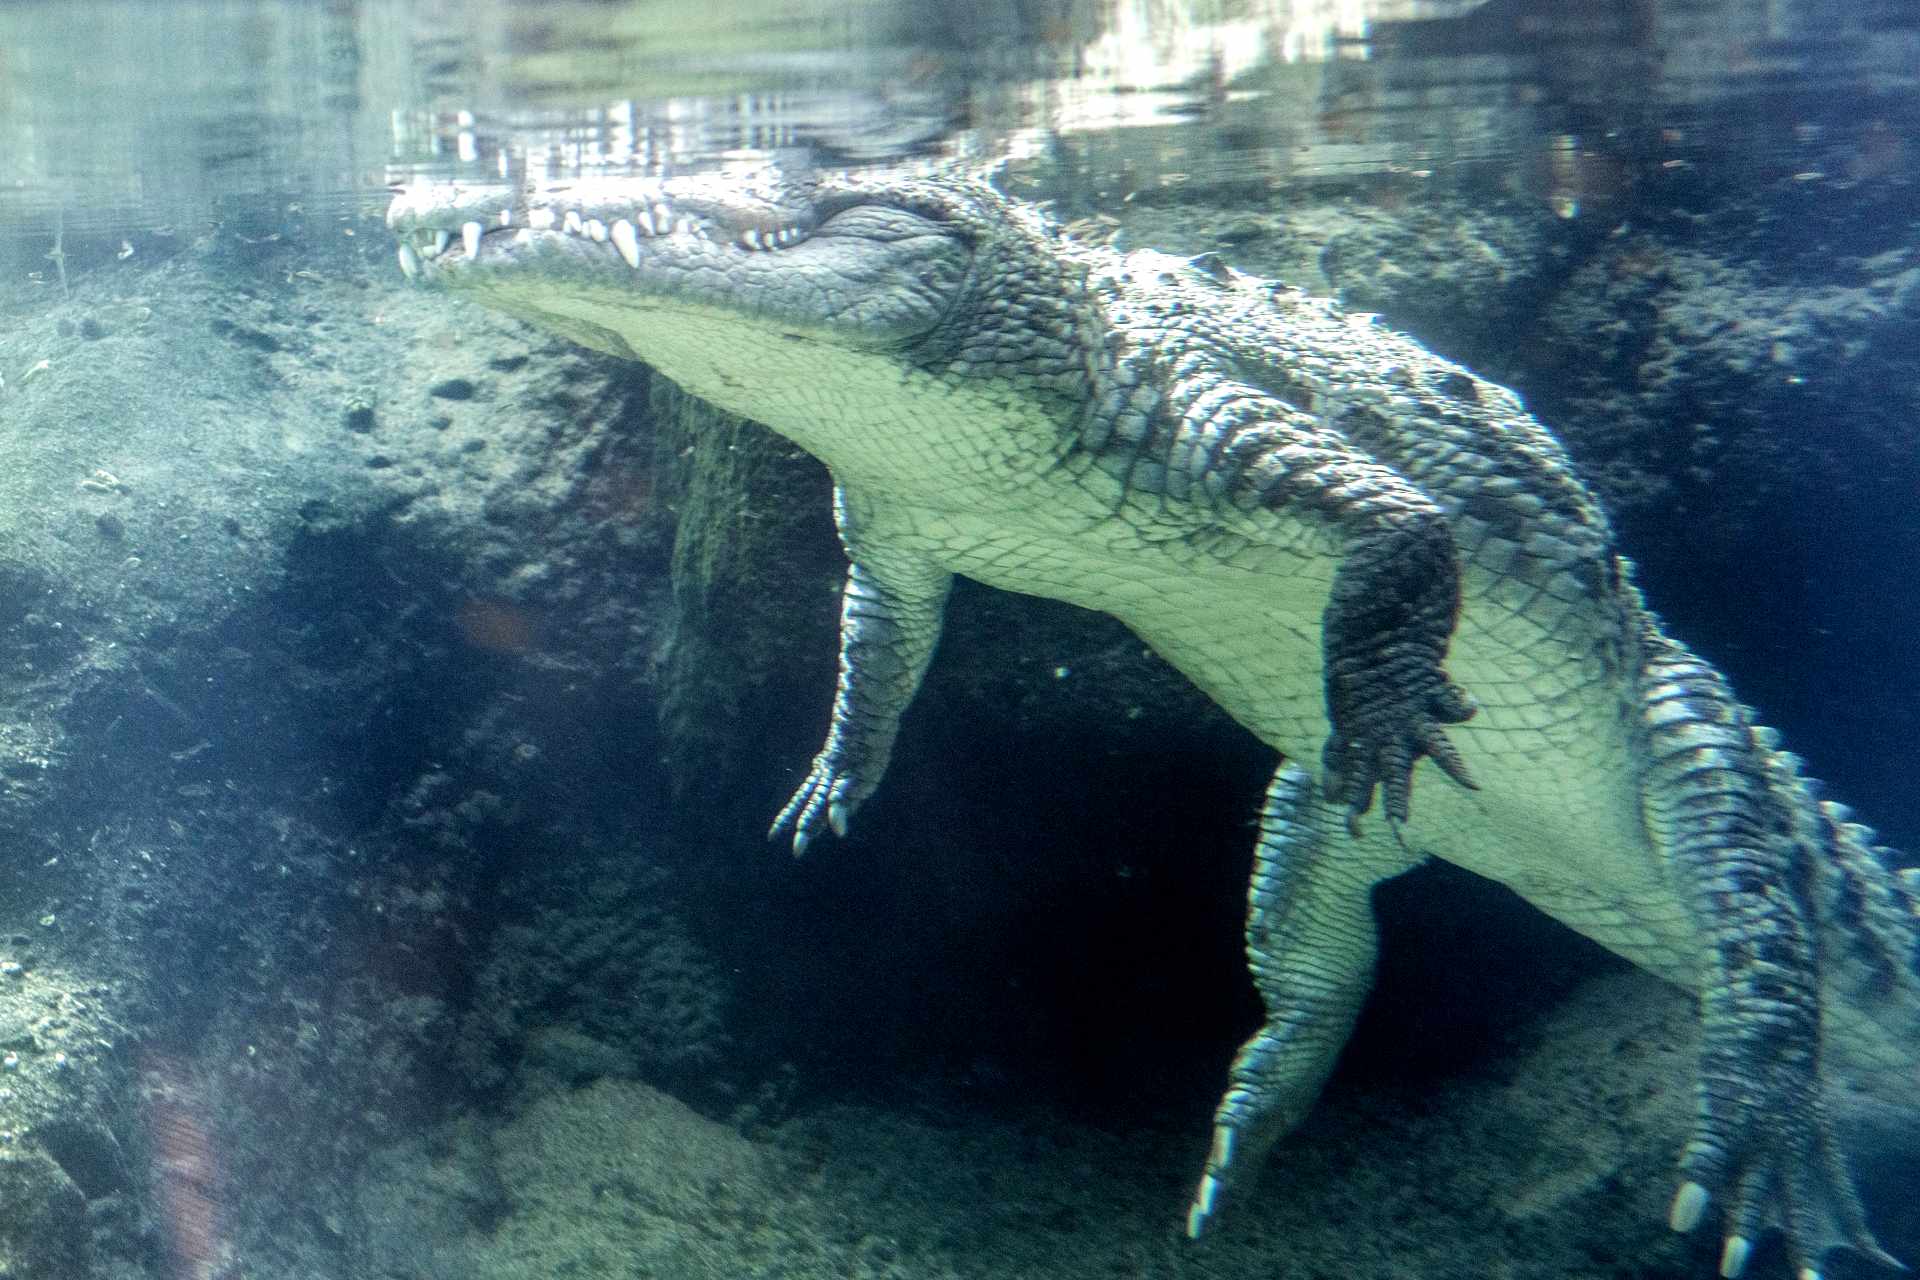 ‘Wrong place, wrong time’: diver whose head was in croc’s jaws